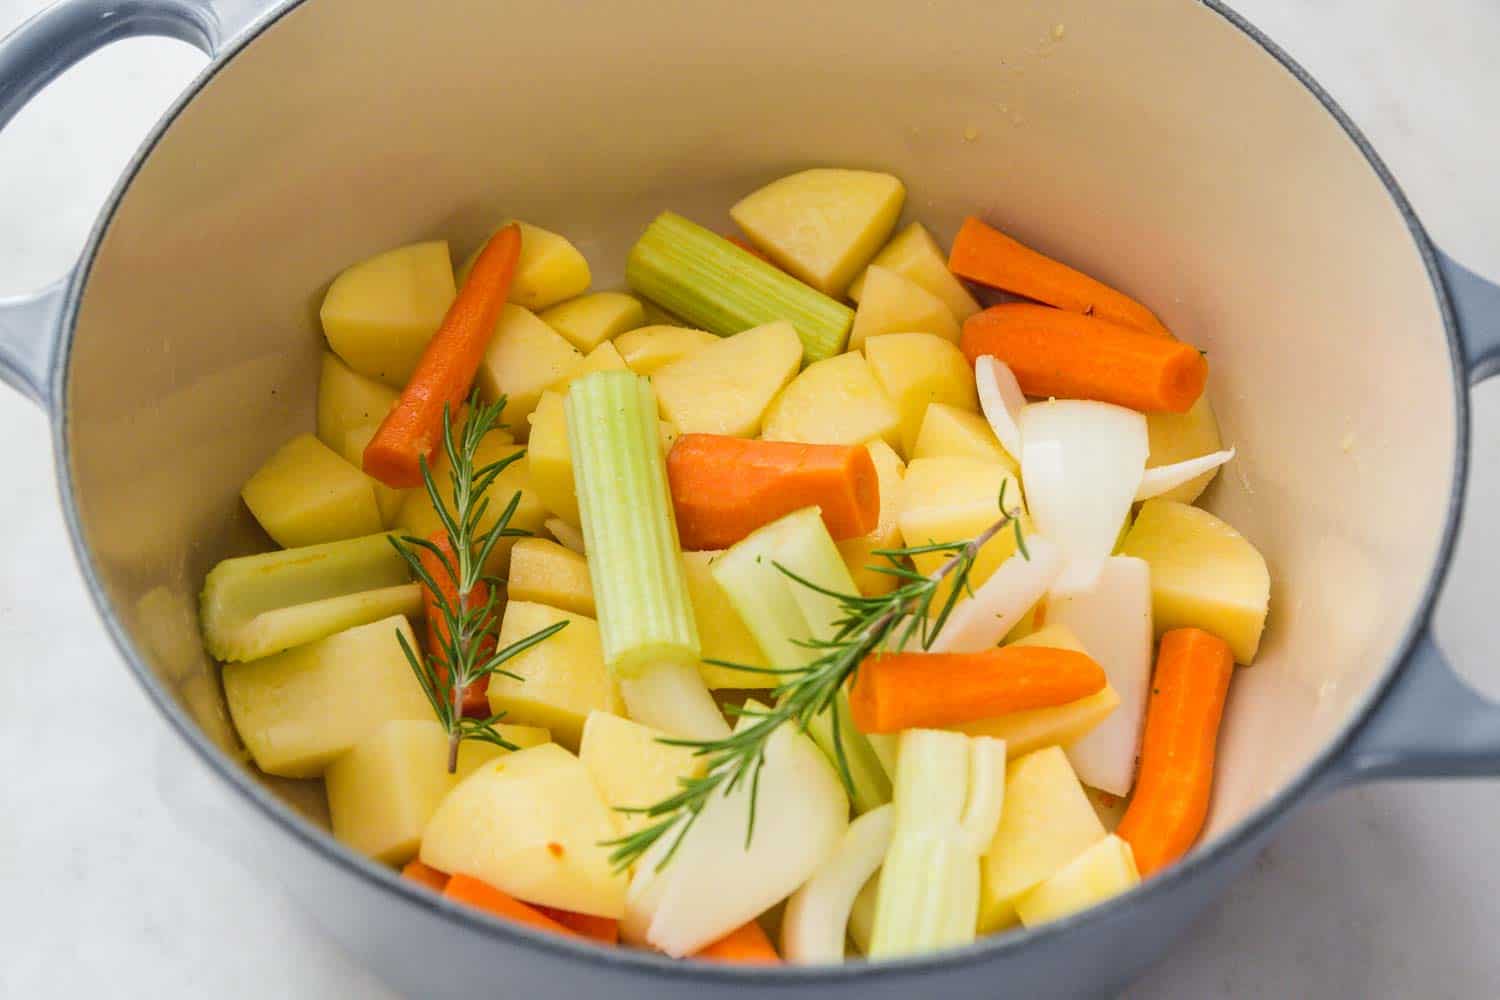 Vegetables including carrot, celery, onion and rosemary in a blue dutch oven